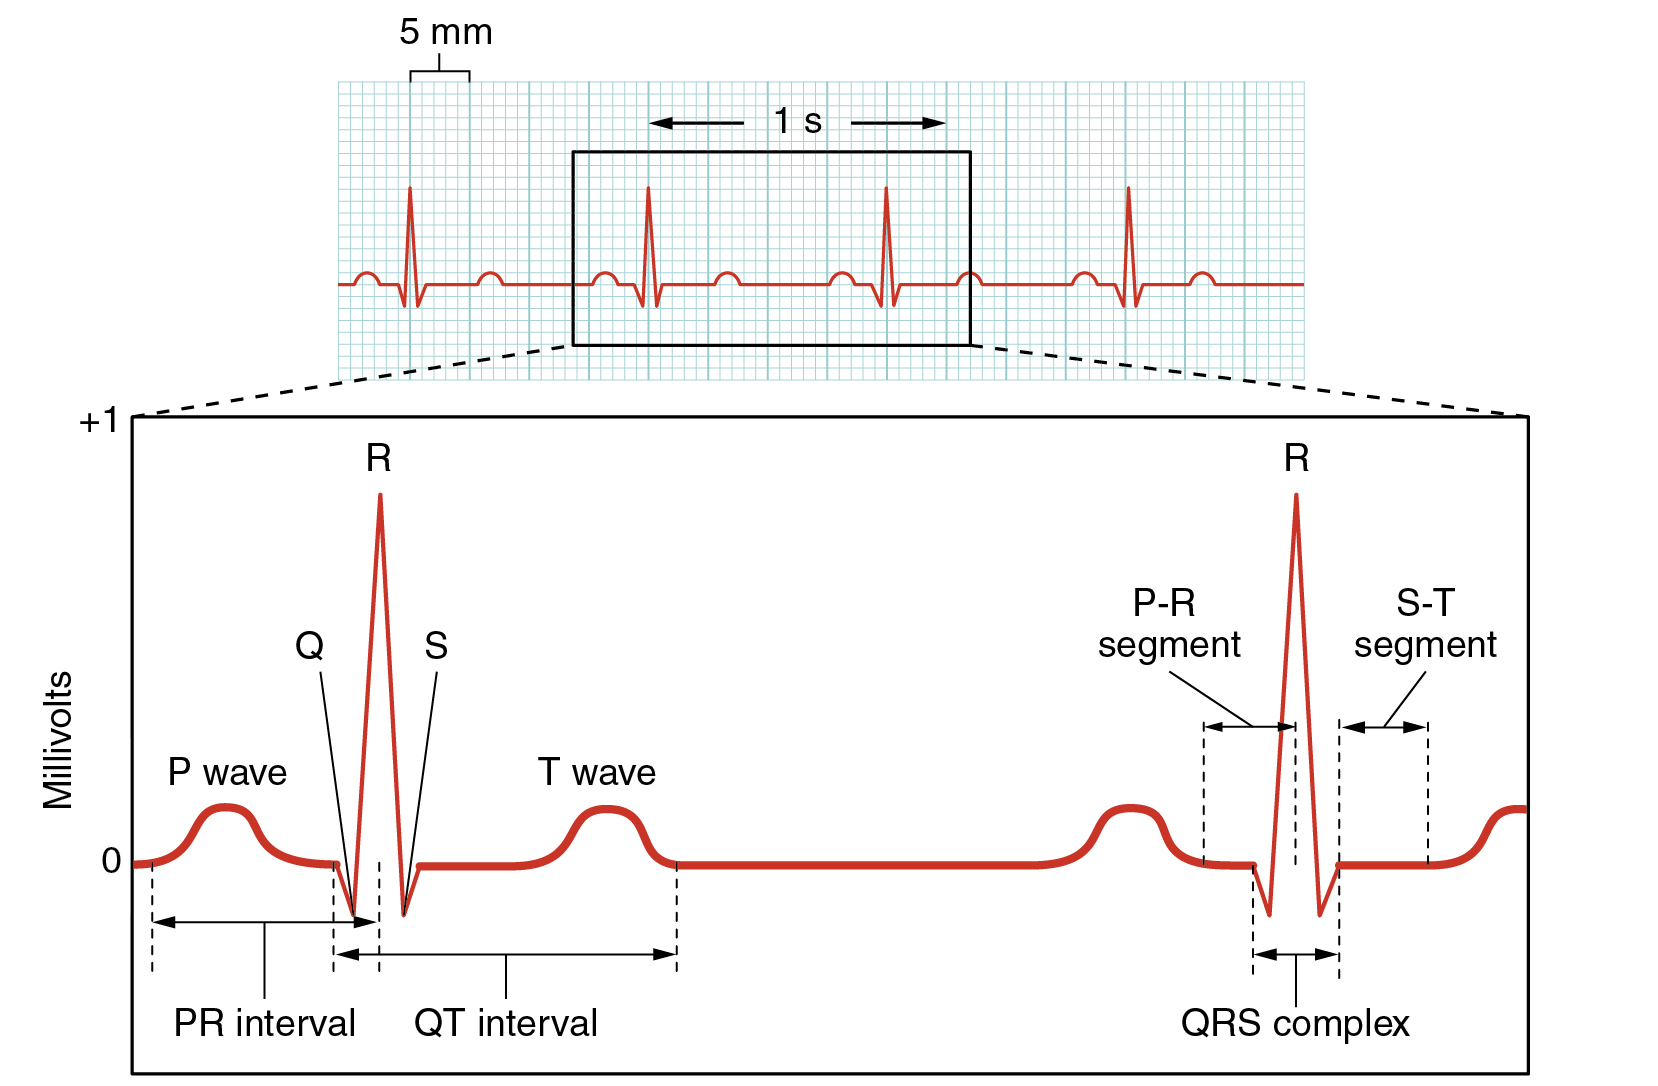 An EKG (ECG) has clearly defined, repetitive waves and is a well-established diagnostic tool. Credit: Creative Commons, Anatomy &amp; Physiology, Connexions Web site. http://cnx.org/content/col11496/1.6 